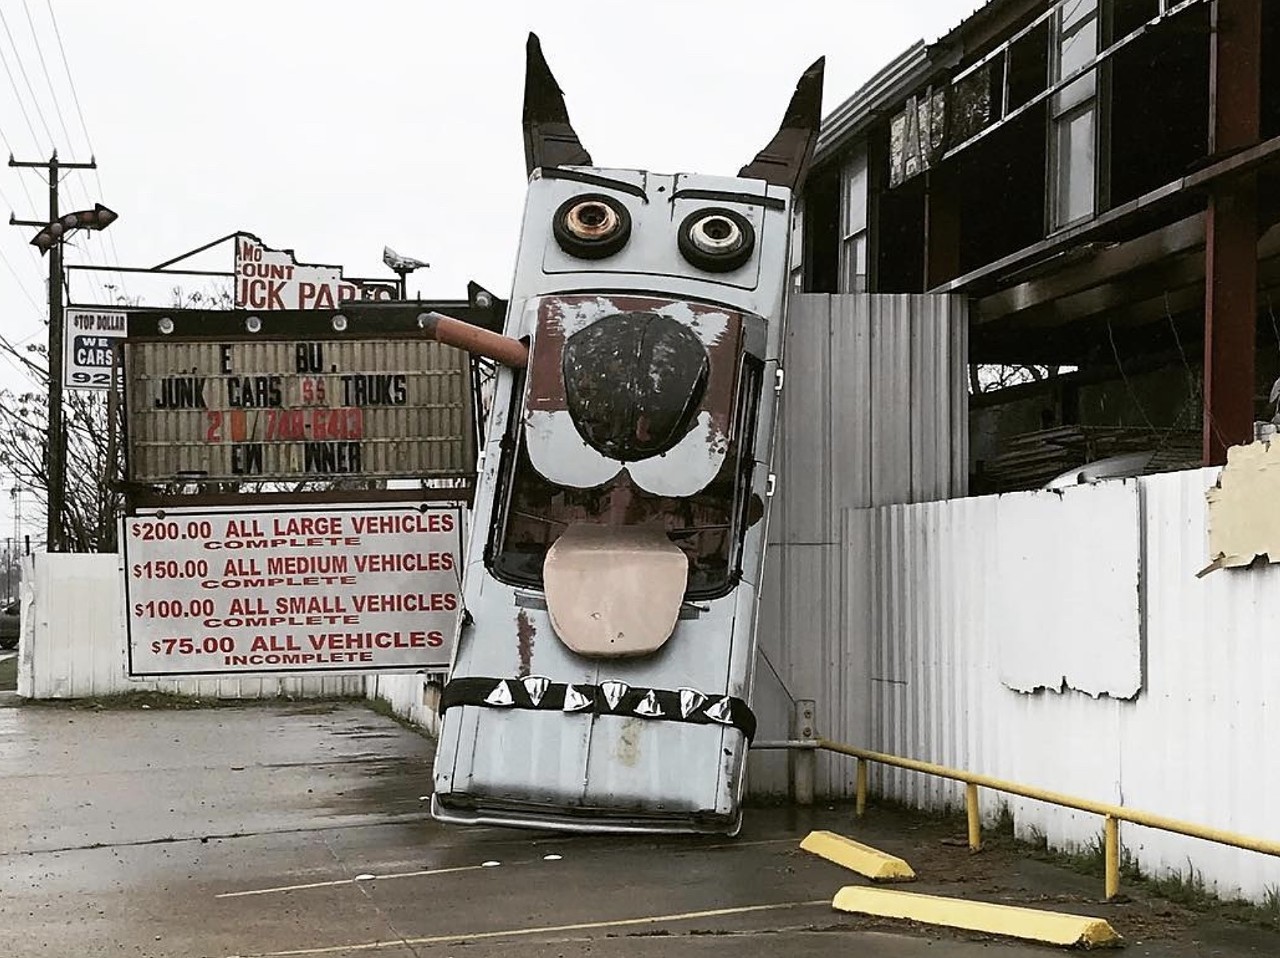 Junk Yard Dog
1201 Somerset Road
This canny canine is made by the same artist as the giant cowboy boots which sit outside of North Star Mall. Bob "Daddy-O" Wade, who passed away in late 2019, built the pup out of cars in his junk yard: a 1966 Plymouth Fury, a Volkswagen Beetle and the hood of a Cadillac.